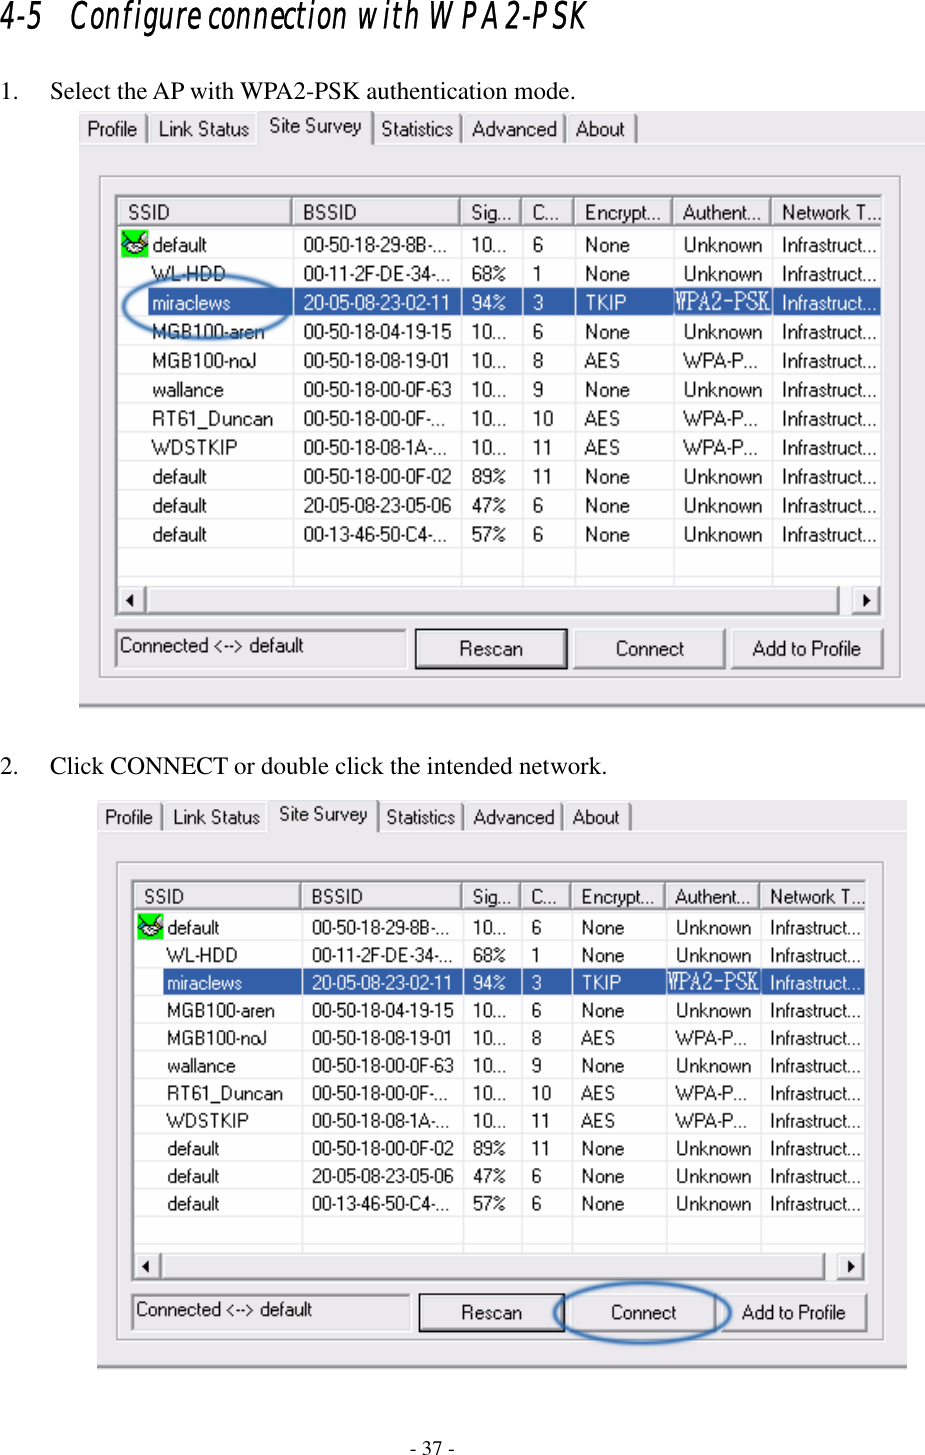    - 37 - 4-5   Configure connection with WPA2-PSK 1. Select the AP with WPA2-PSK authentication mode.   2. Click CONNECT or double click the intended network.  